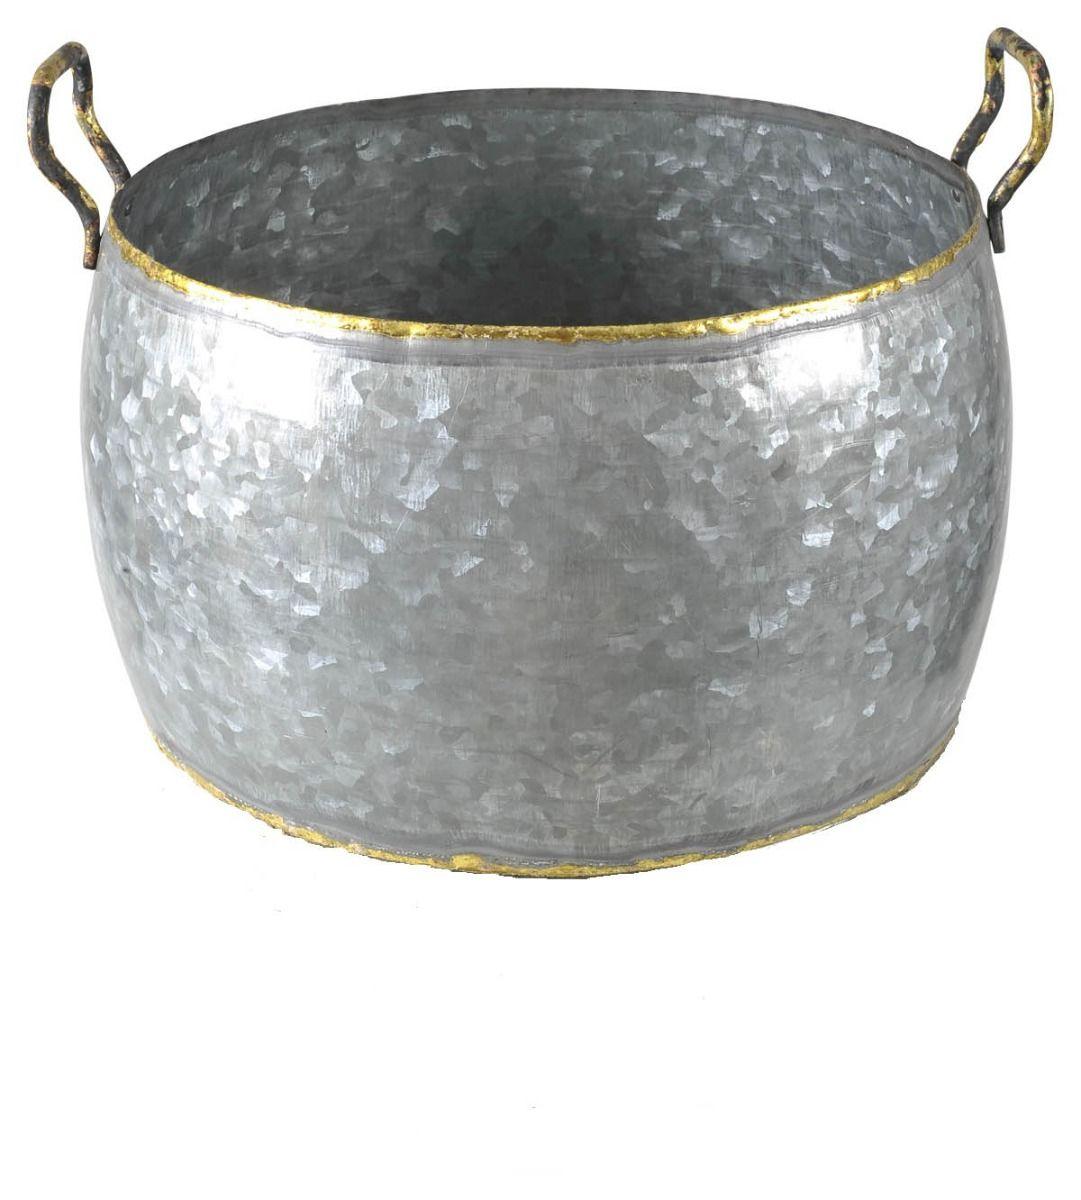 HG Living Austin Round Tub With Handle Silver Oxidised - OutdoorGF789332092122850 1